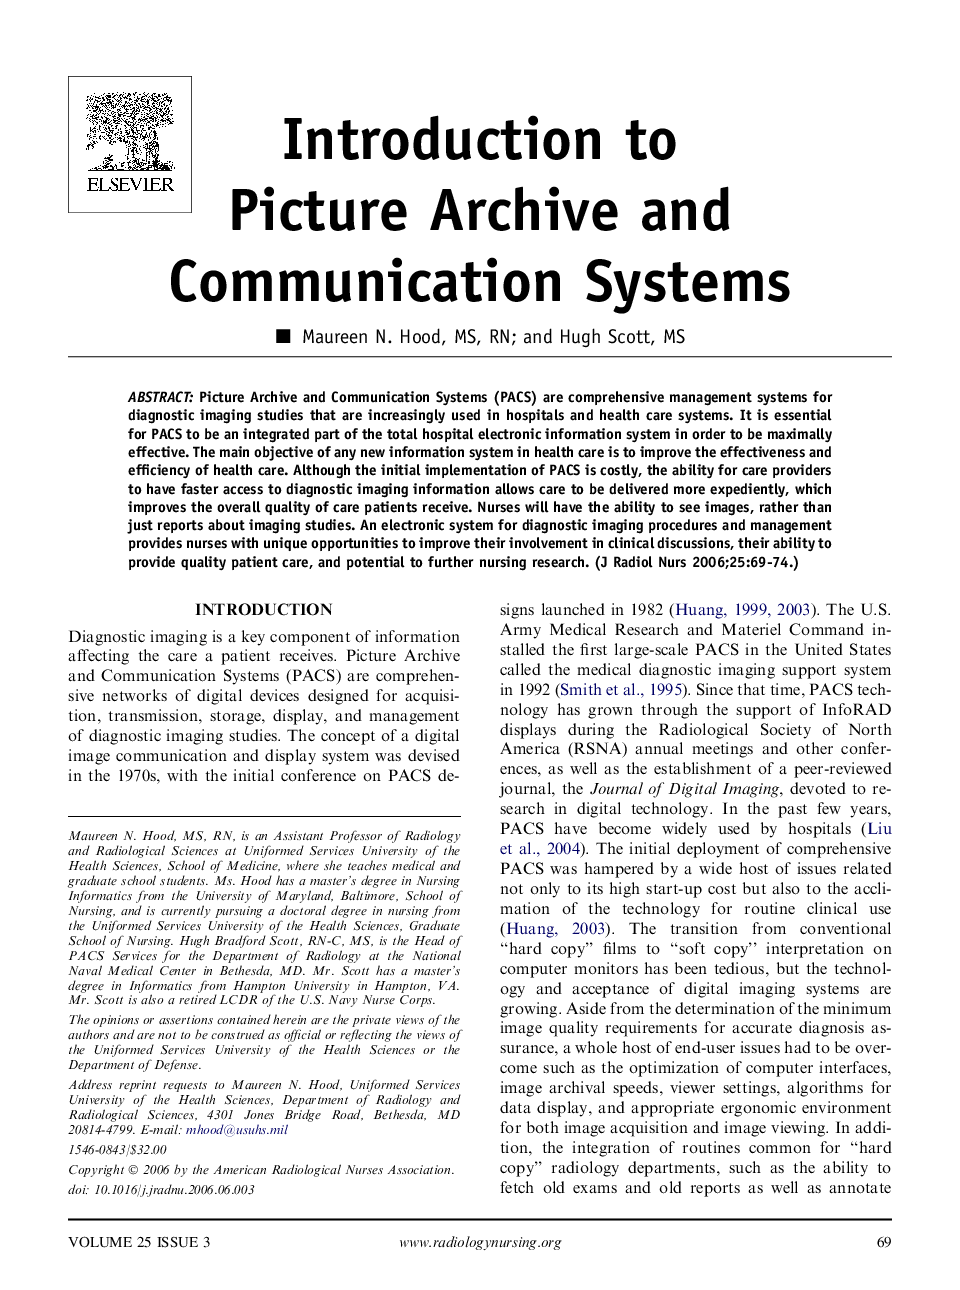 Introduction to Picture Archive and Communication Systems 